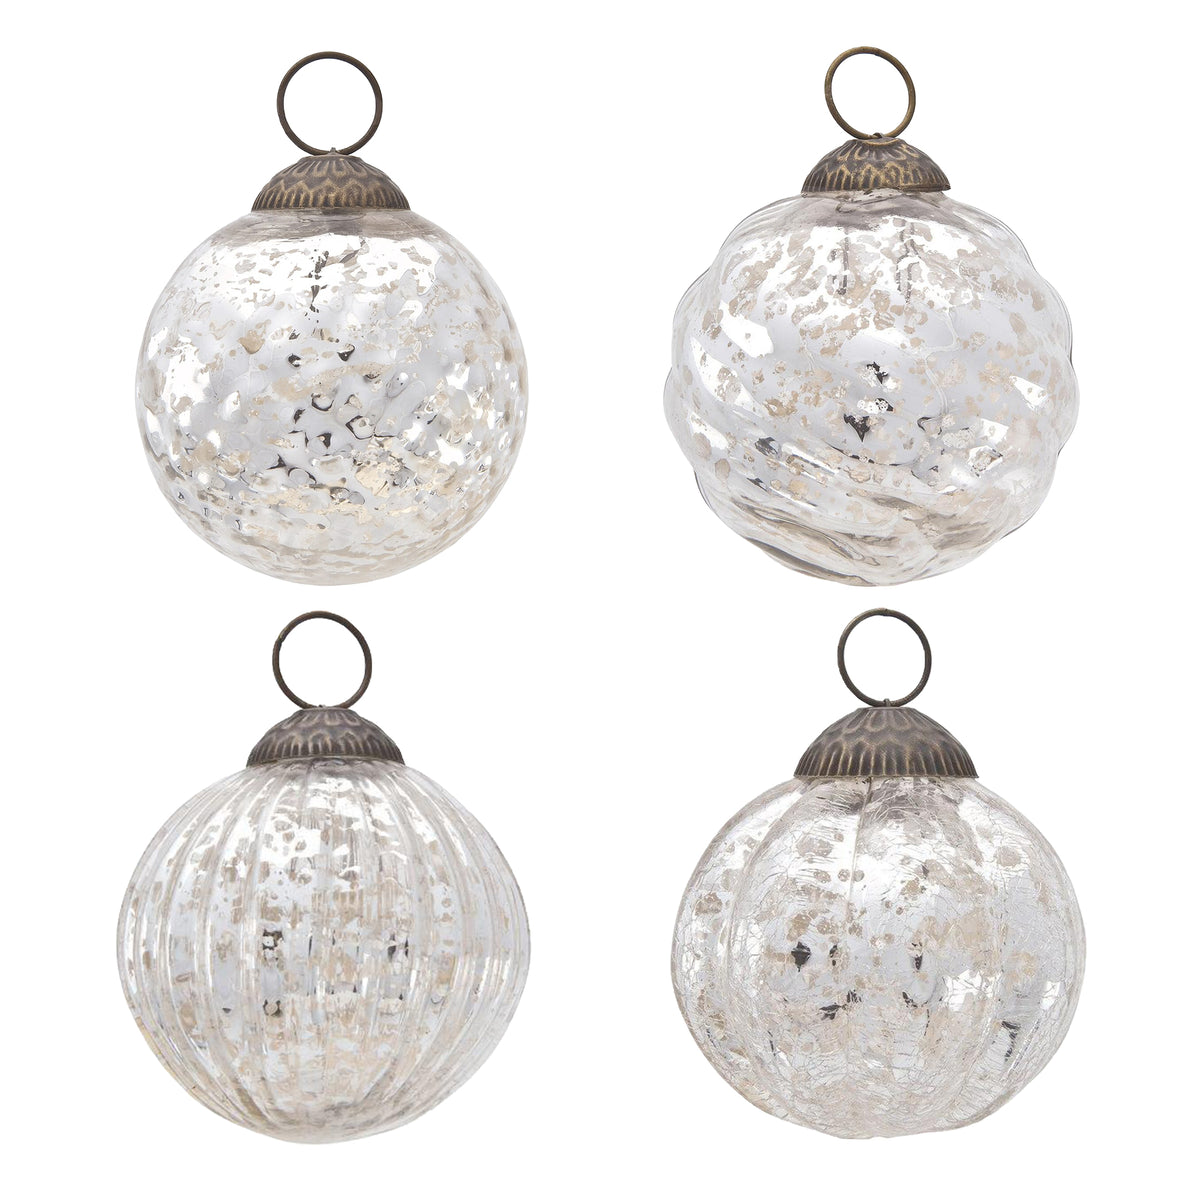 4 Pack | Silver Vintage Elegance Assorted Ornaments Set - Great Gift Idea, Vintage-Style Decorations for Christmas, Special Occasions, Home Decor and Parties